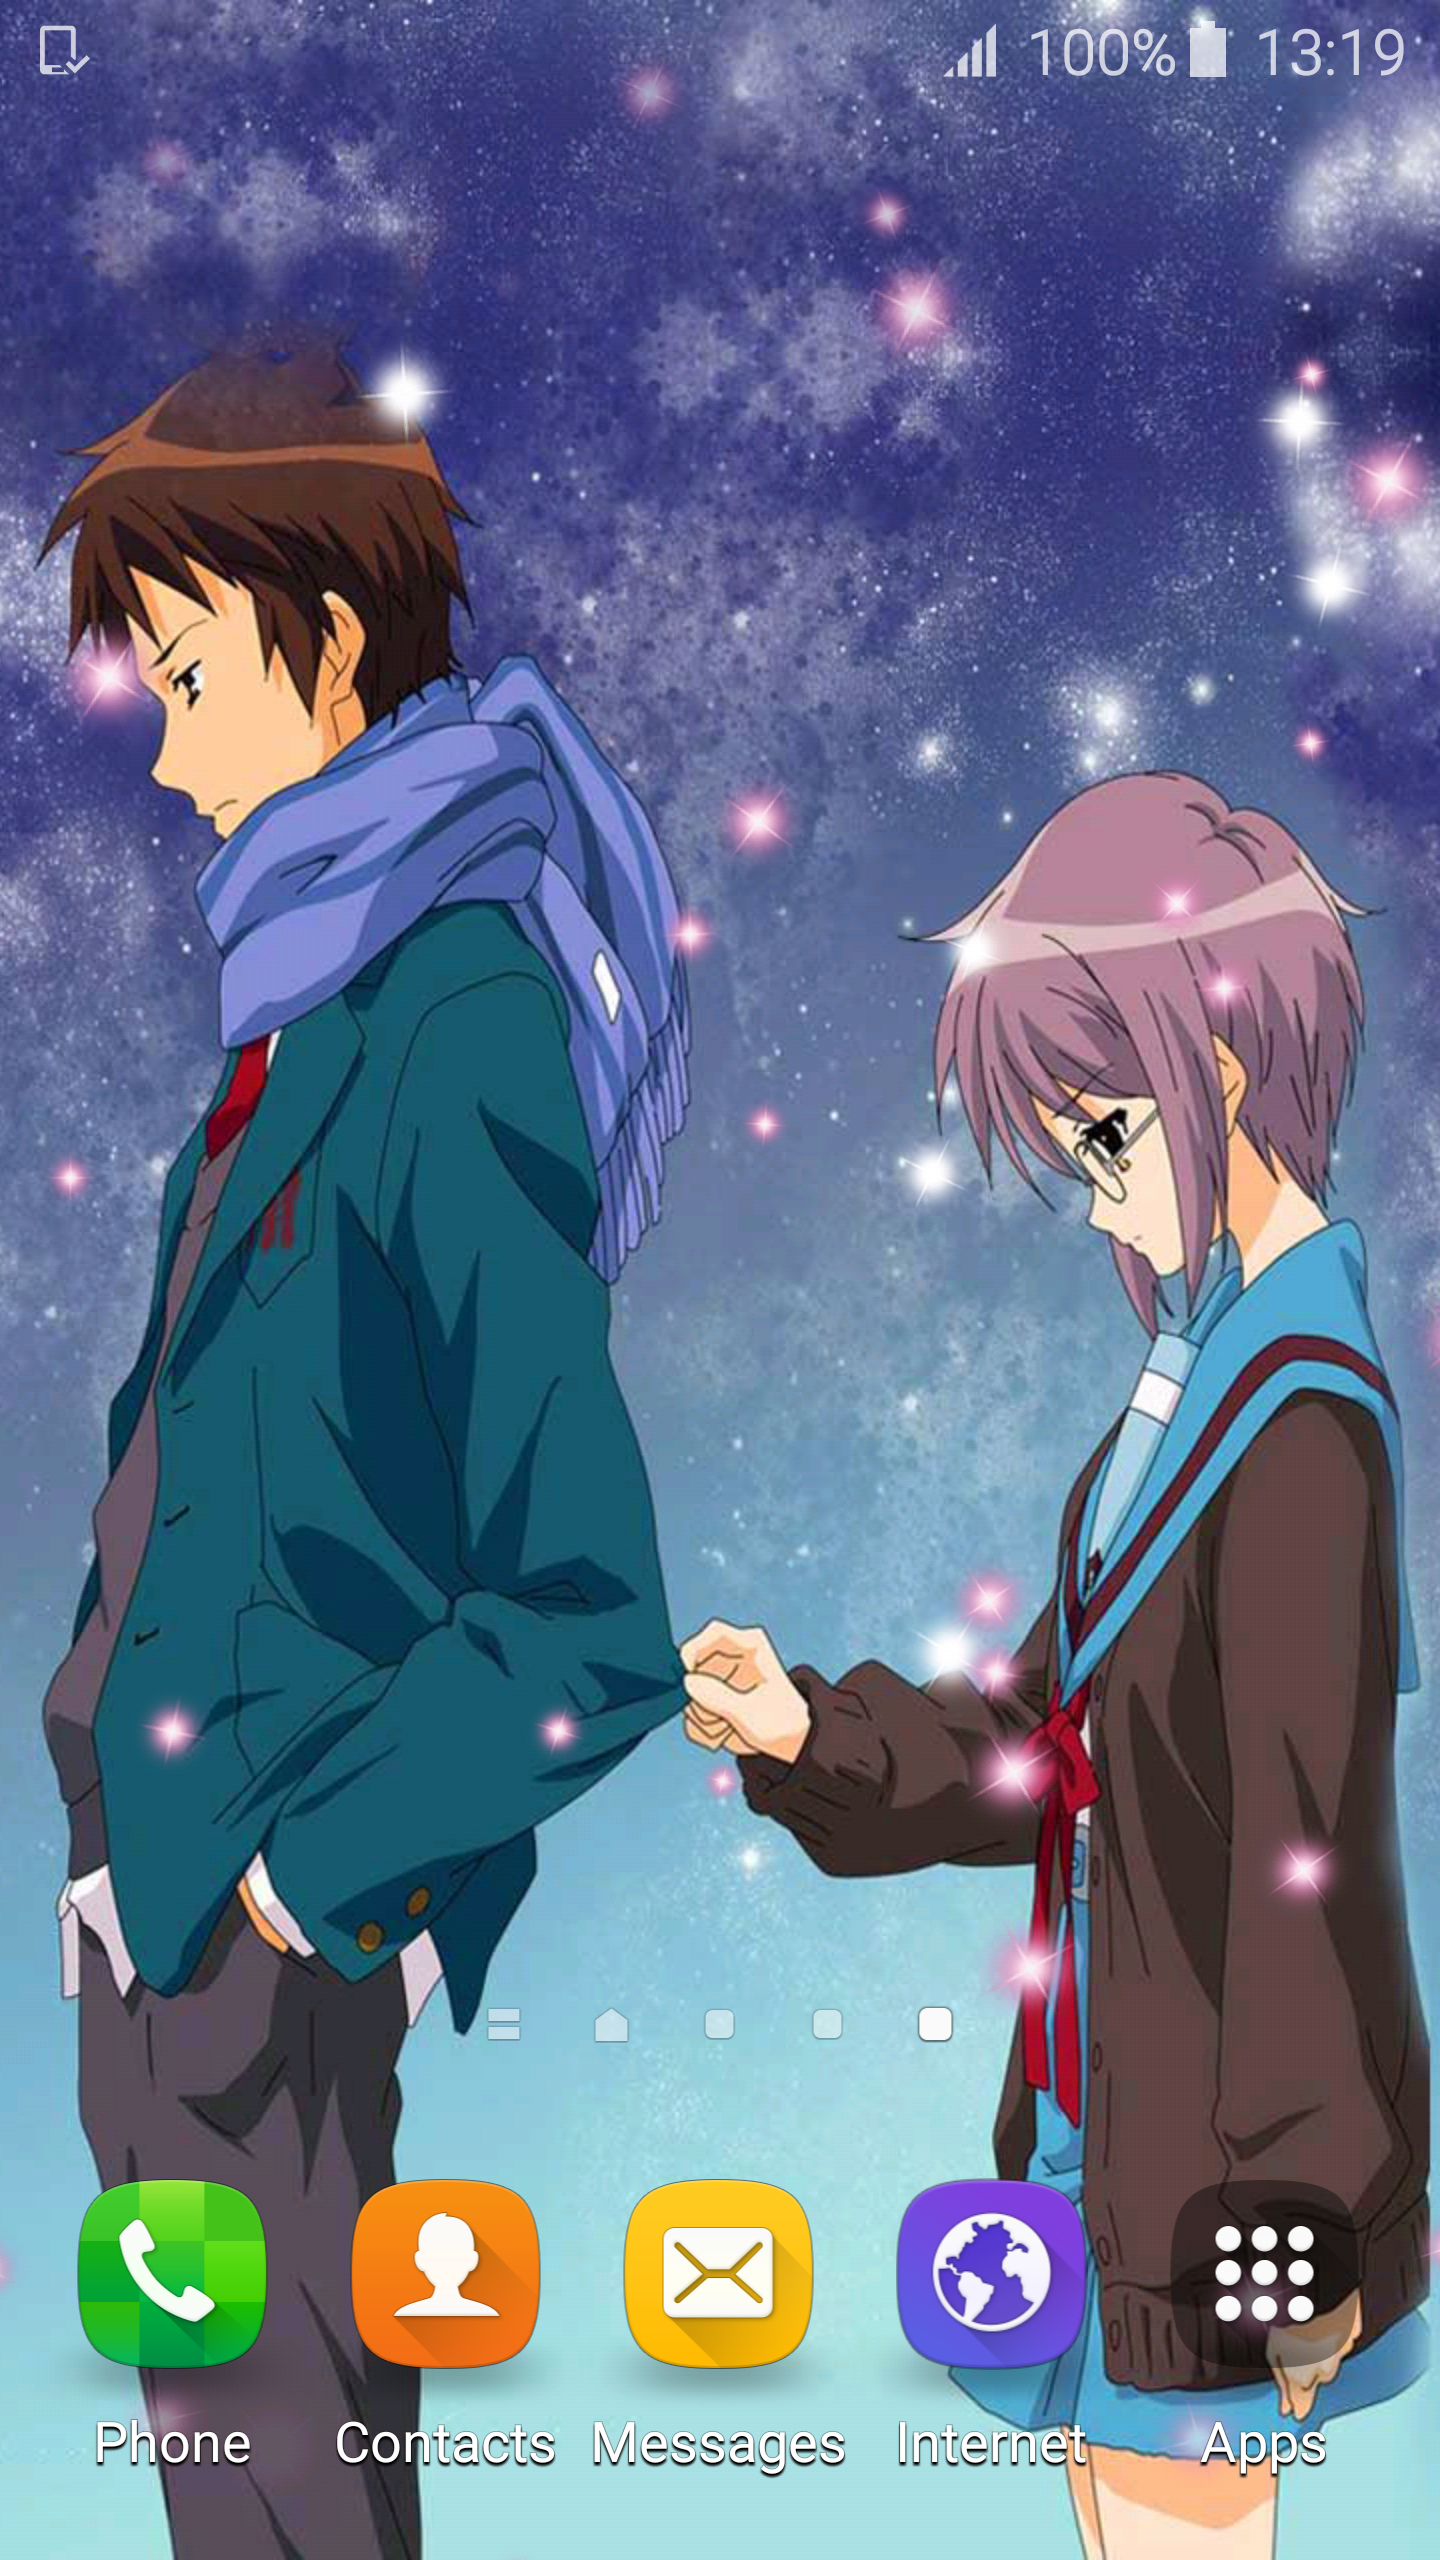 Animated Couple Holding Hands Wallpapers